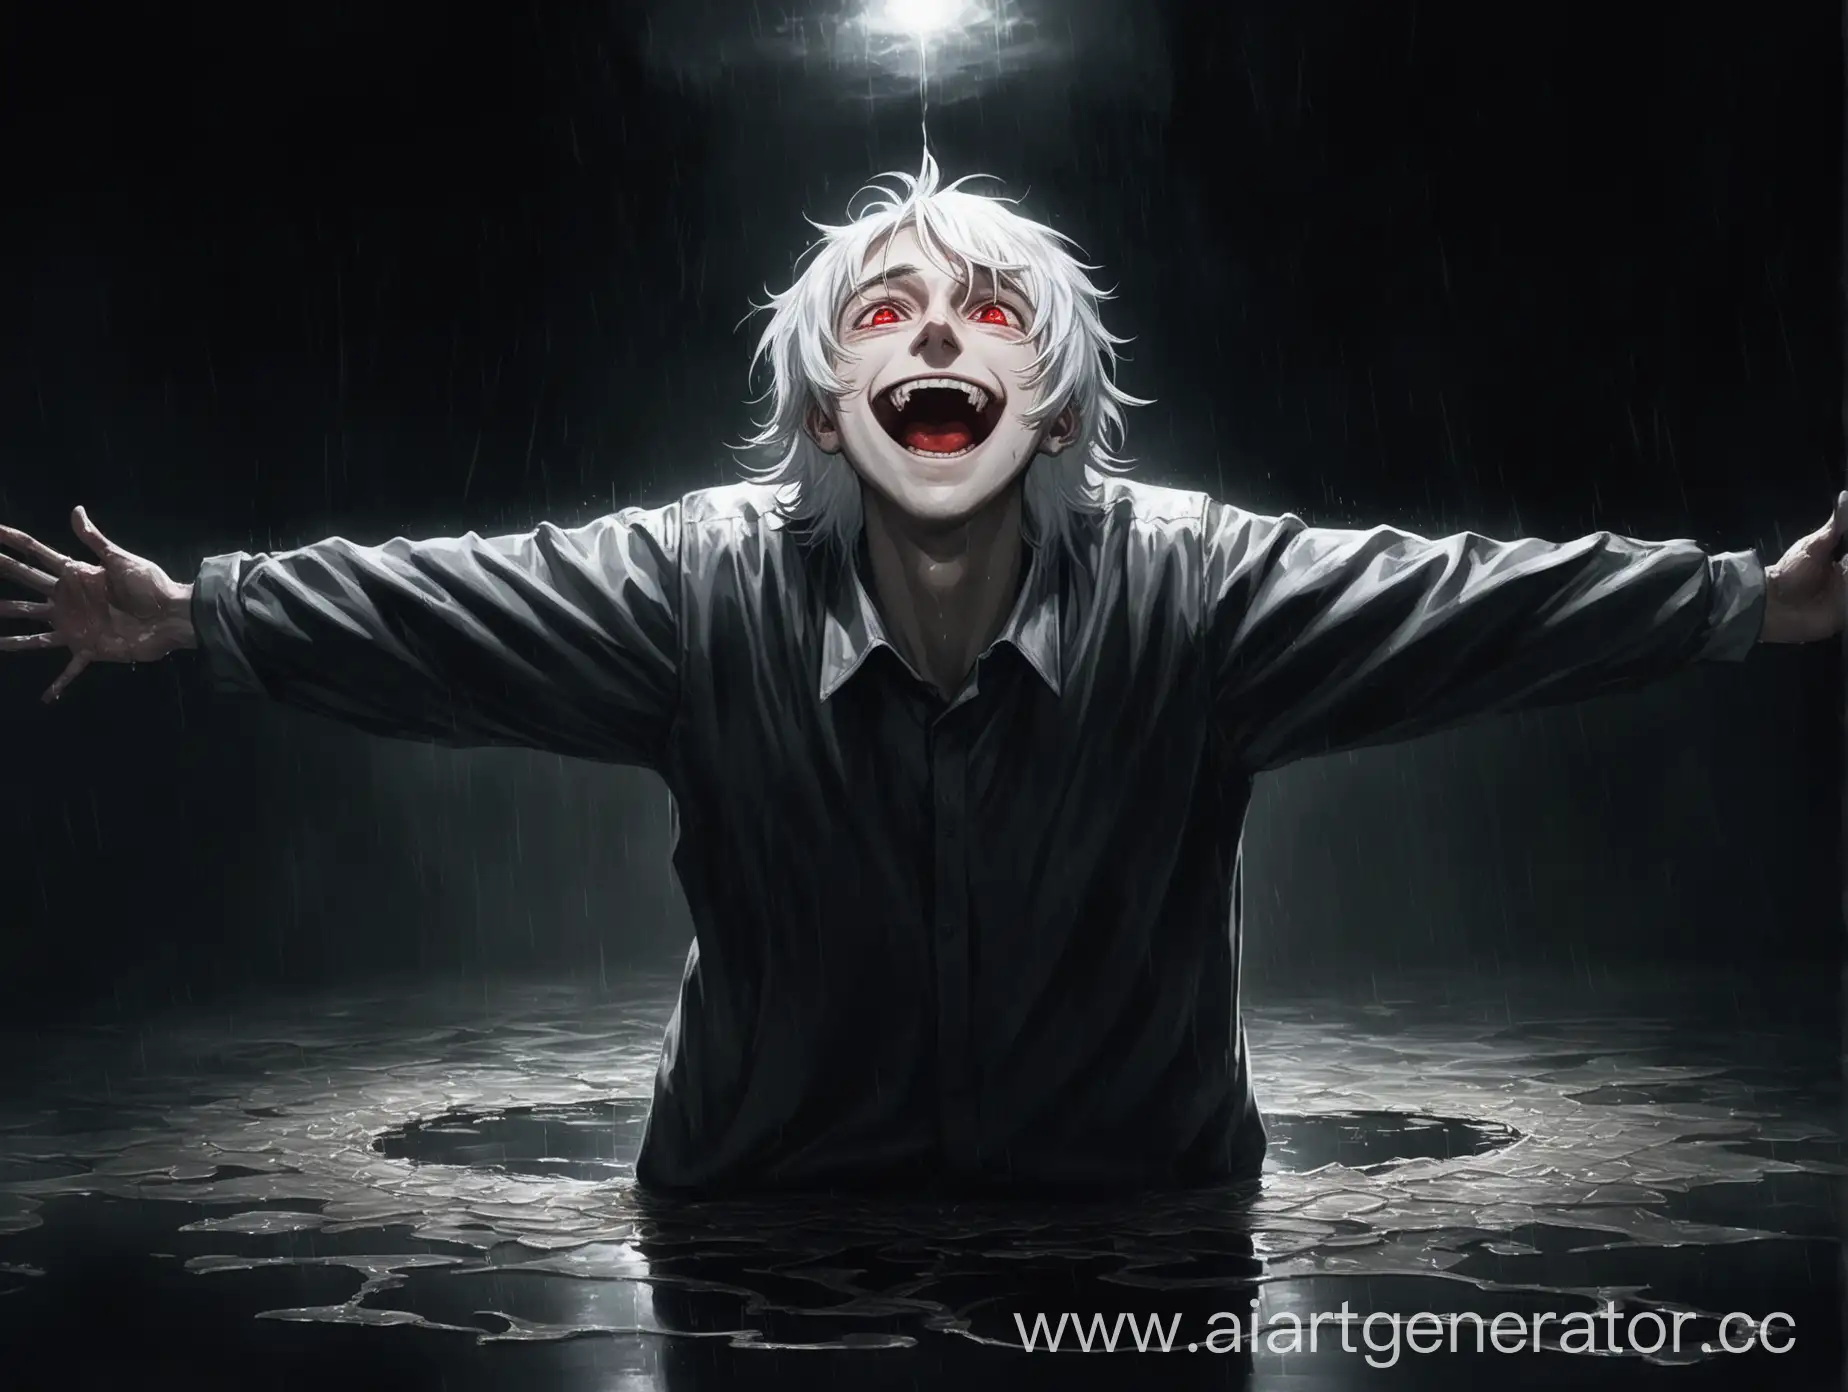 Eccentric-Man-with-Gleaming-Red-Eyes-Laughing-in-Dark-Atmosphere